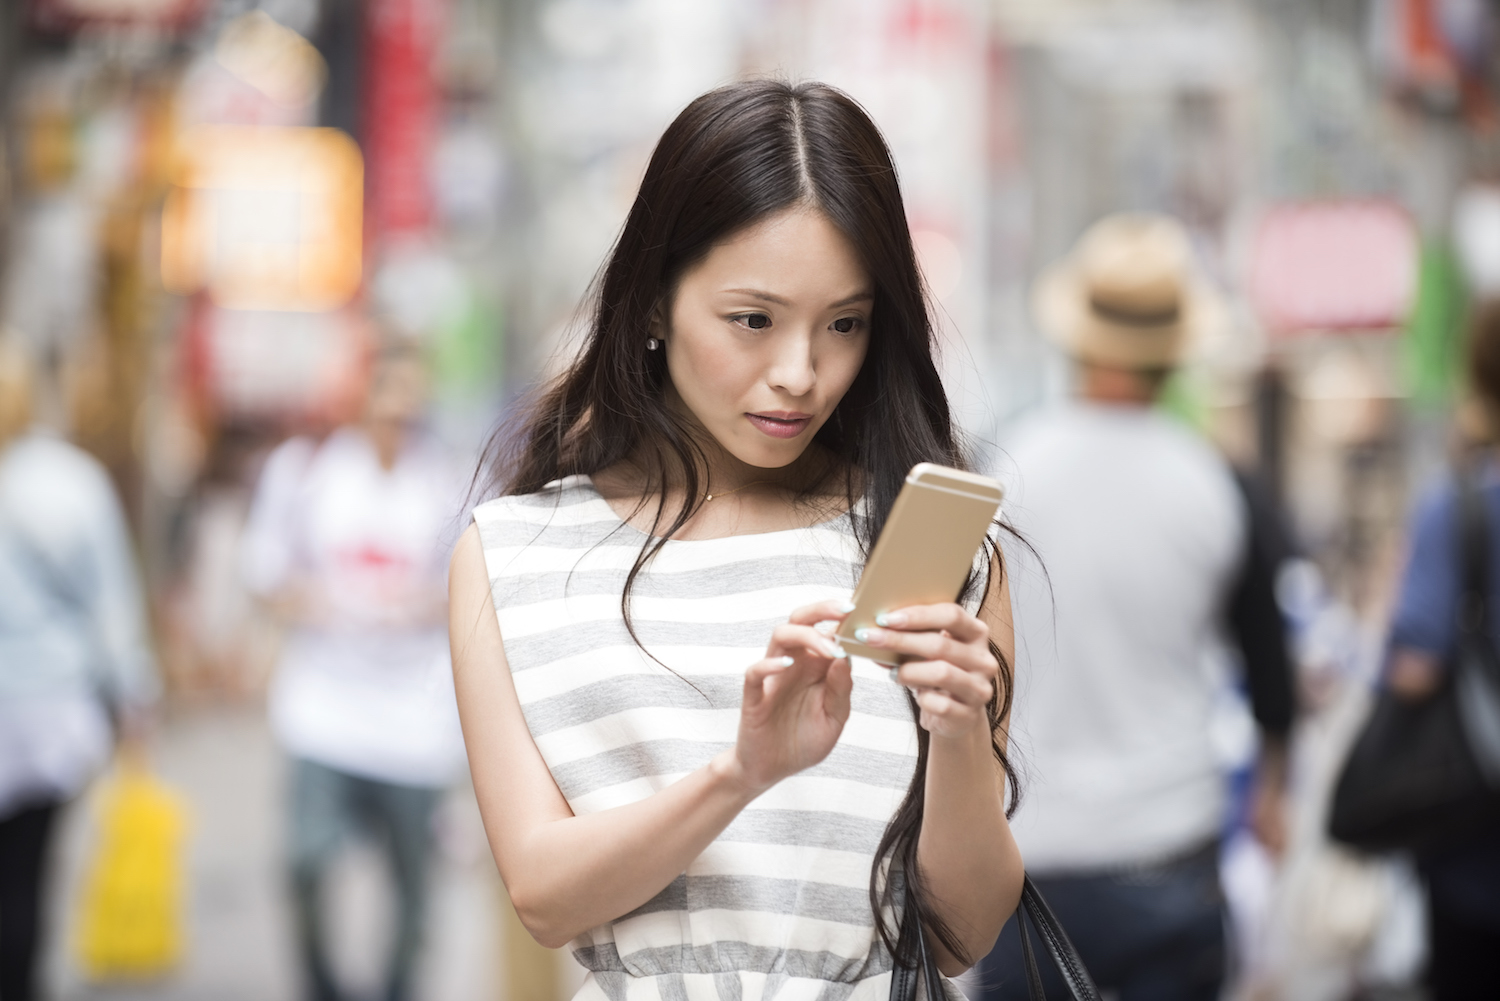 Attractive young Japanese woman using mobile phone to send text message while on the go in urban street in Shibuya, Tokyo, Japan. Asian female using smartphone outdoors.